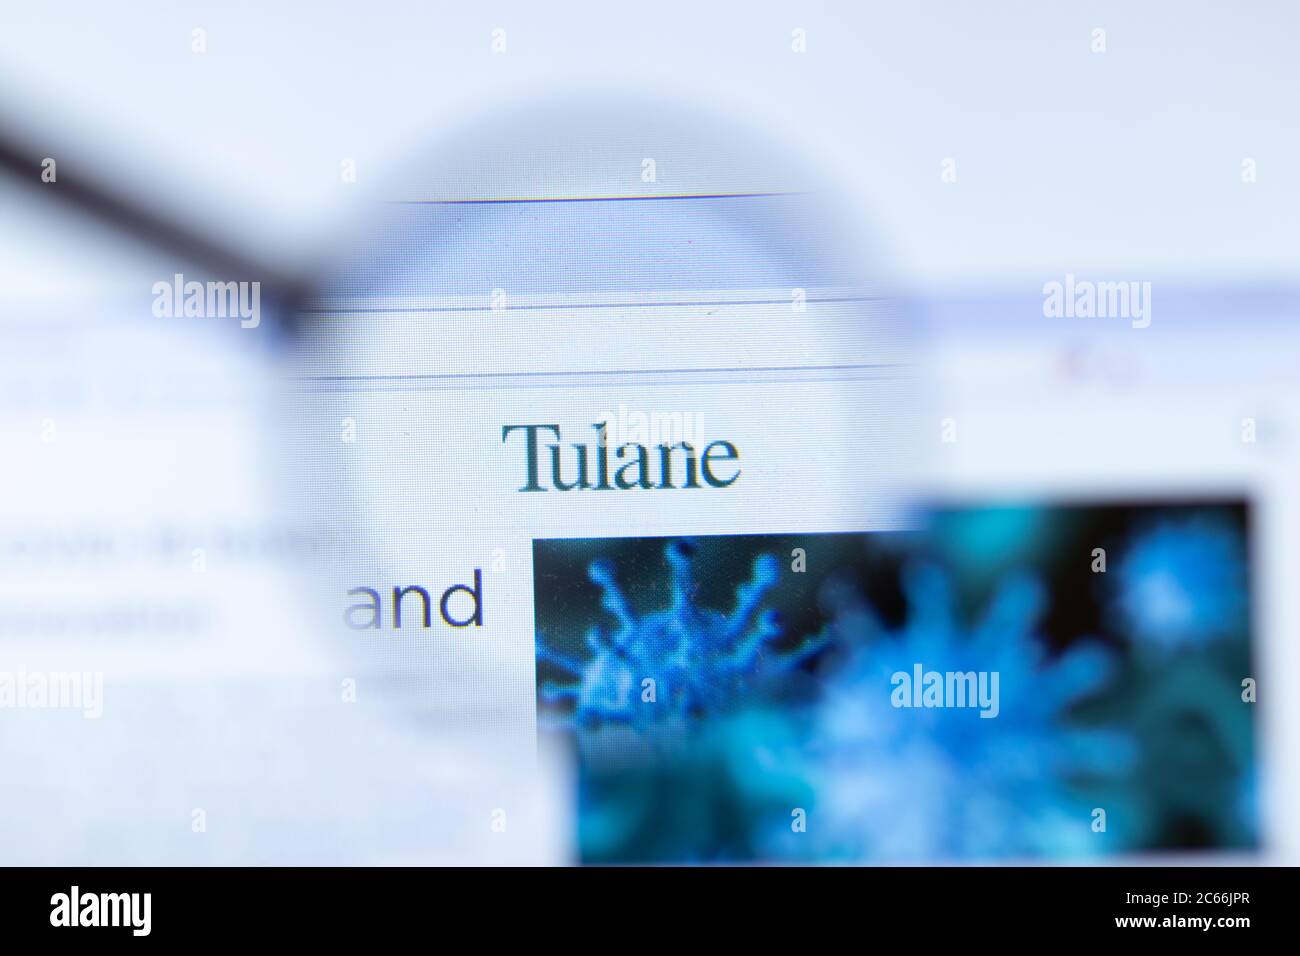 Moscow, Russia - 1 June 2020: Tulane University website with logo, Illustrative Editorial Stock Photo